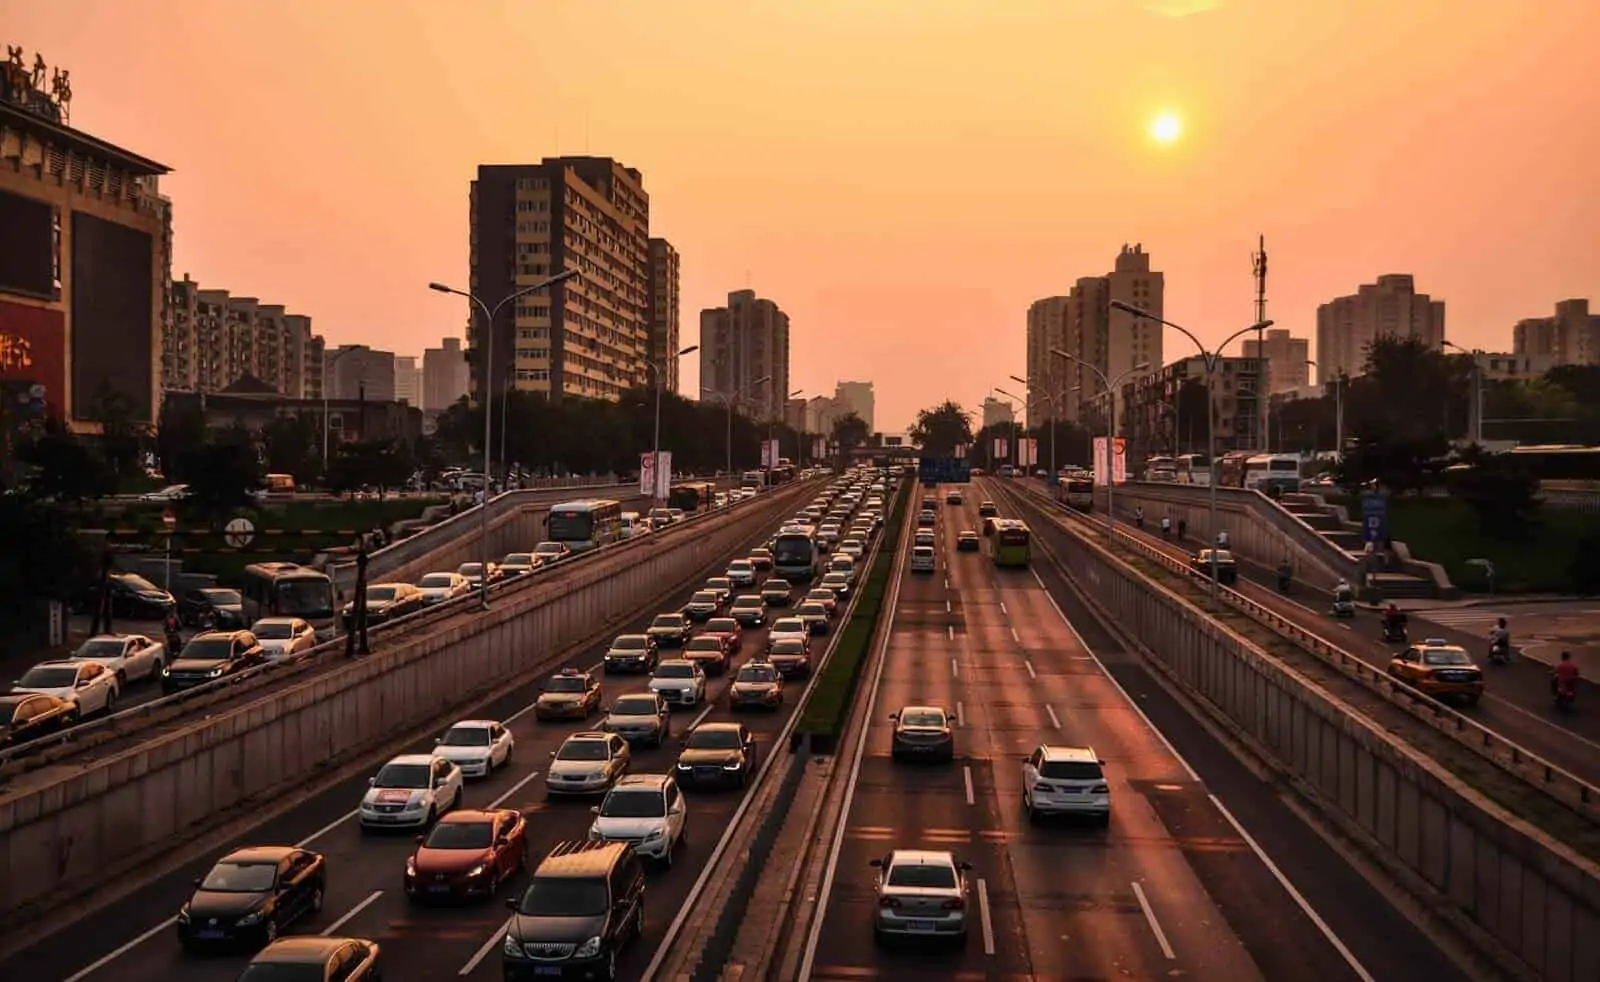 stock image of a highway in a city for a how to start a carpool post